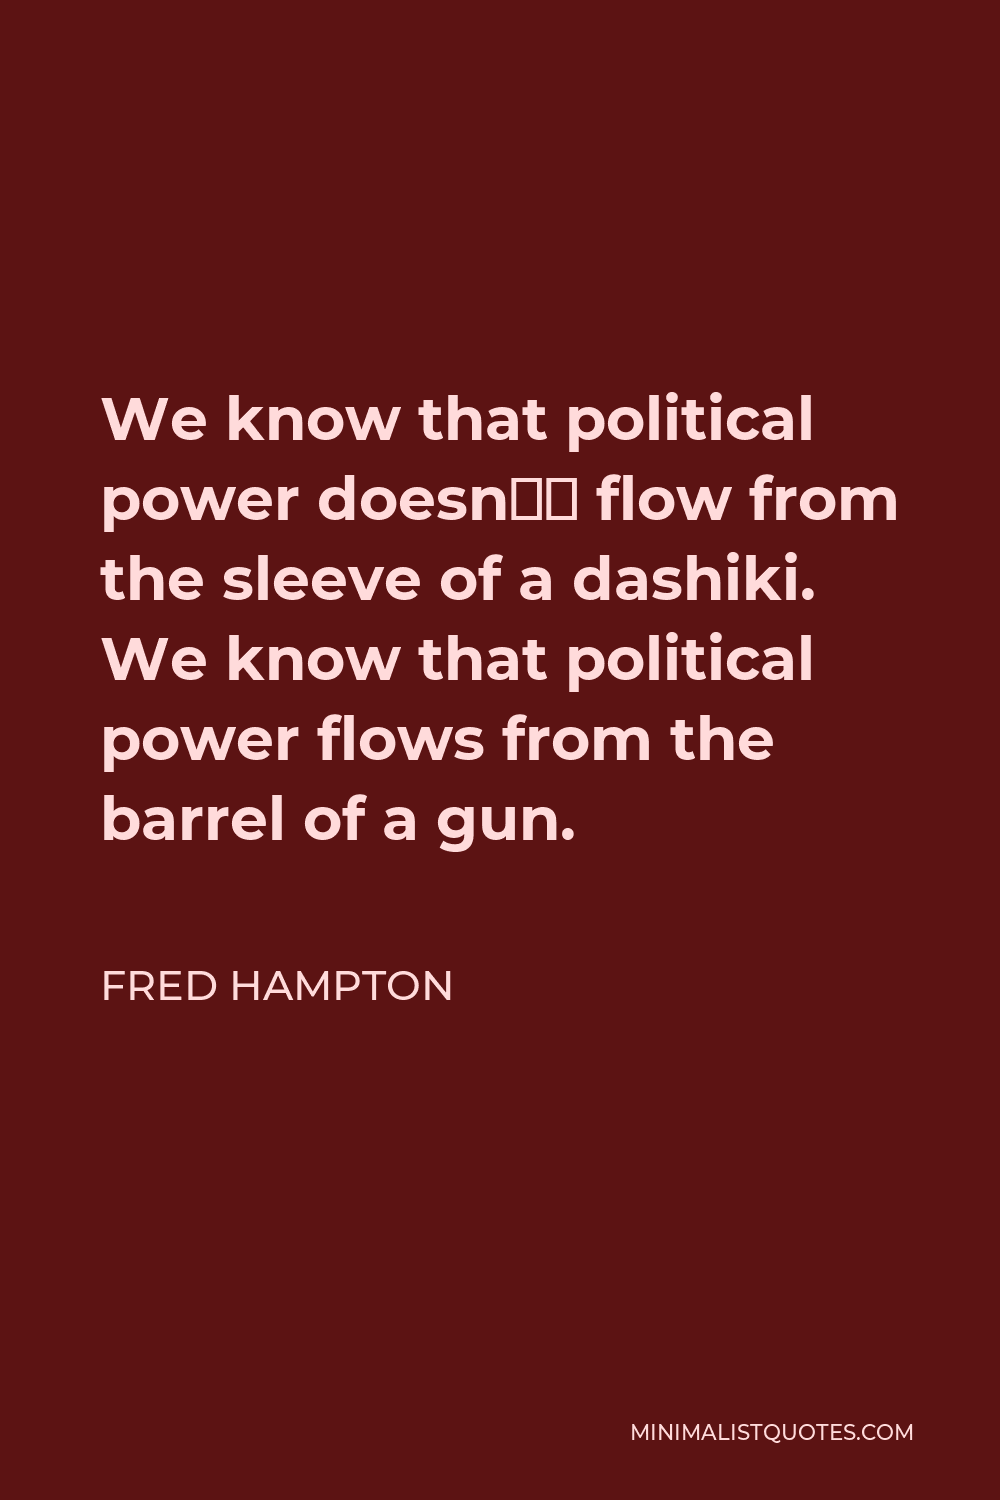 Fred Hampton Quote - We know that political power doesn’t flow from the sleeve of a dashiki. We know that political power flows from the barrel of a gun.